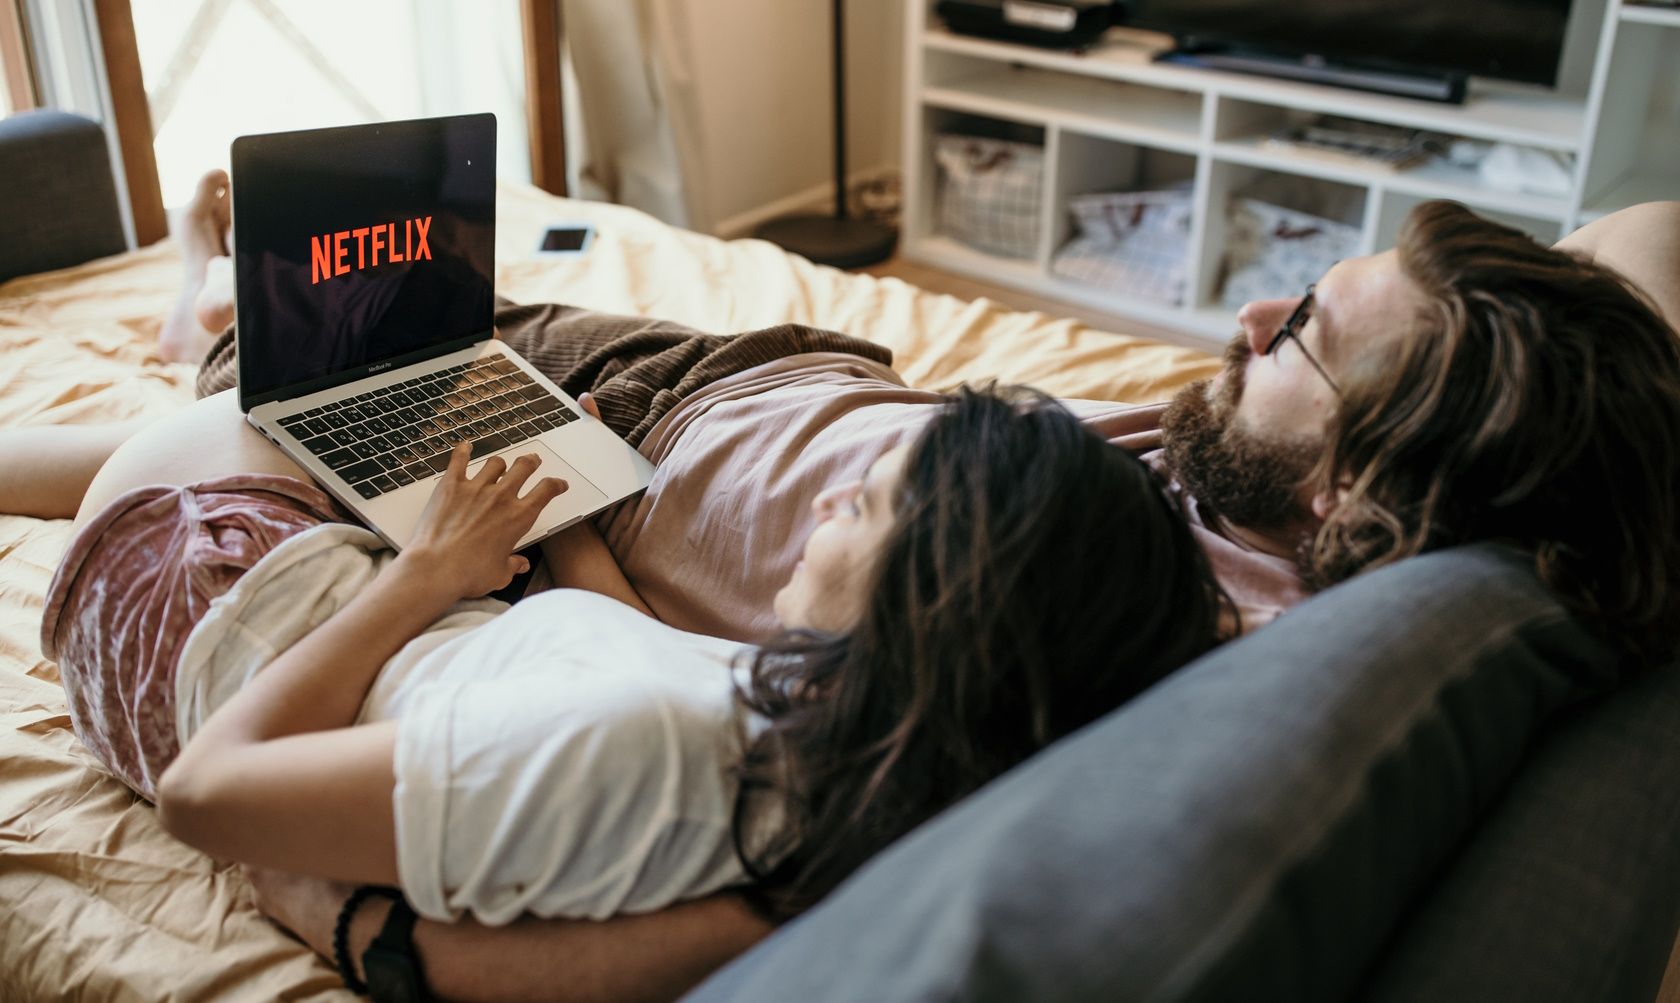 10 Apps to Watch Movies Together with Friends Remotely